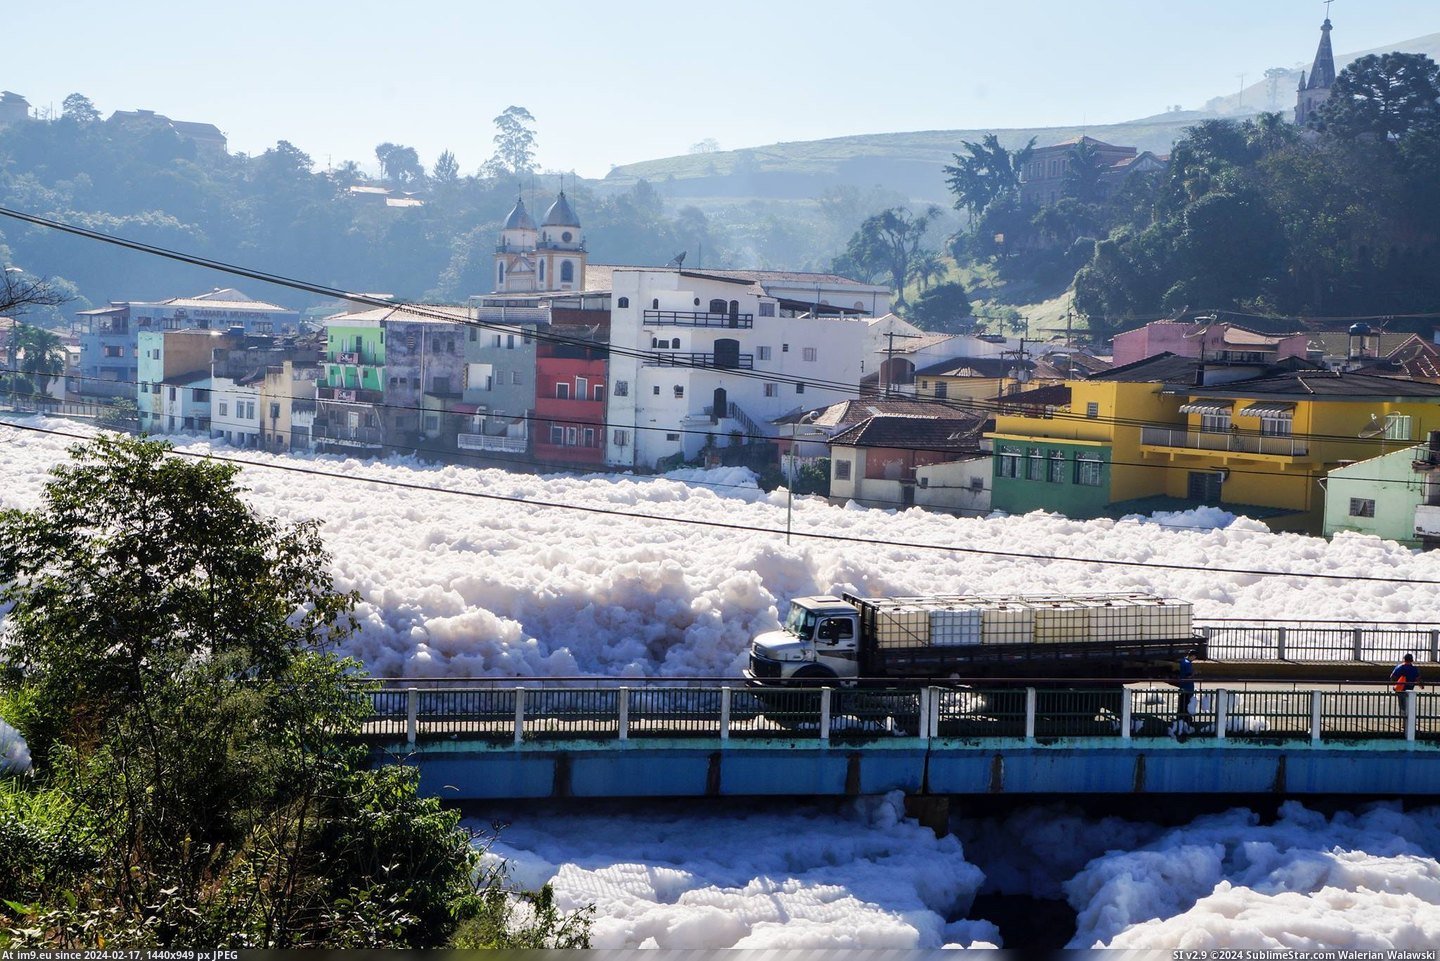 #Wtf #River #Foam #Pollution #Paulo #Covered #Brazil #Caused [Wtf] River in São Paulo, Brazil is covered in foam caused by pollution Pic. (Image of album My r/WTF favs))